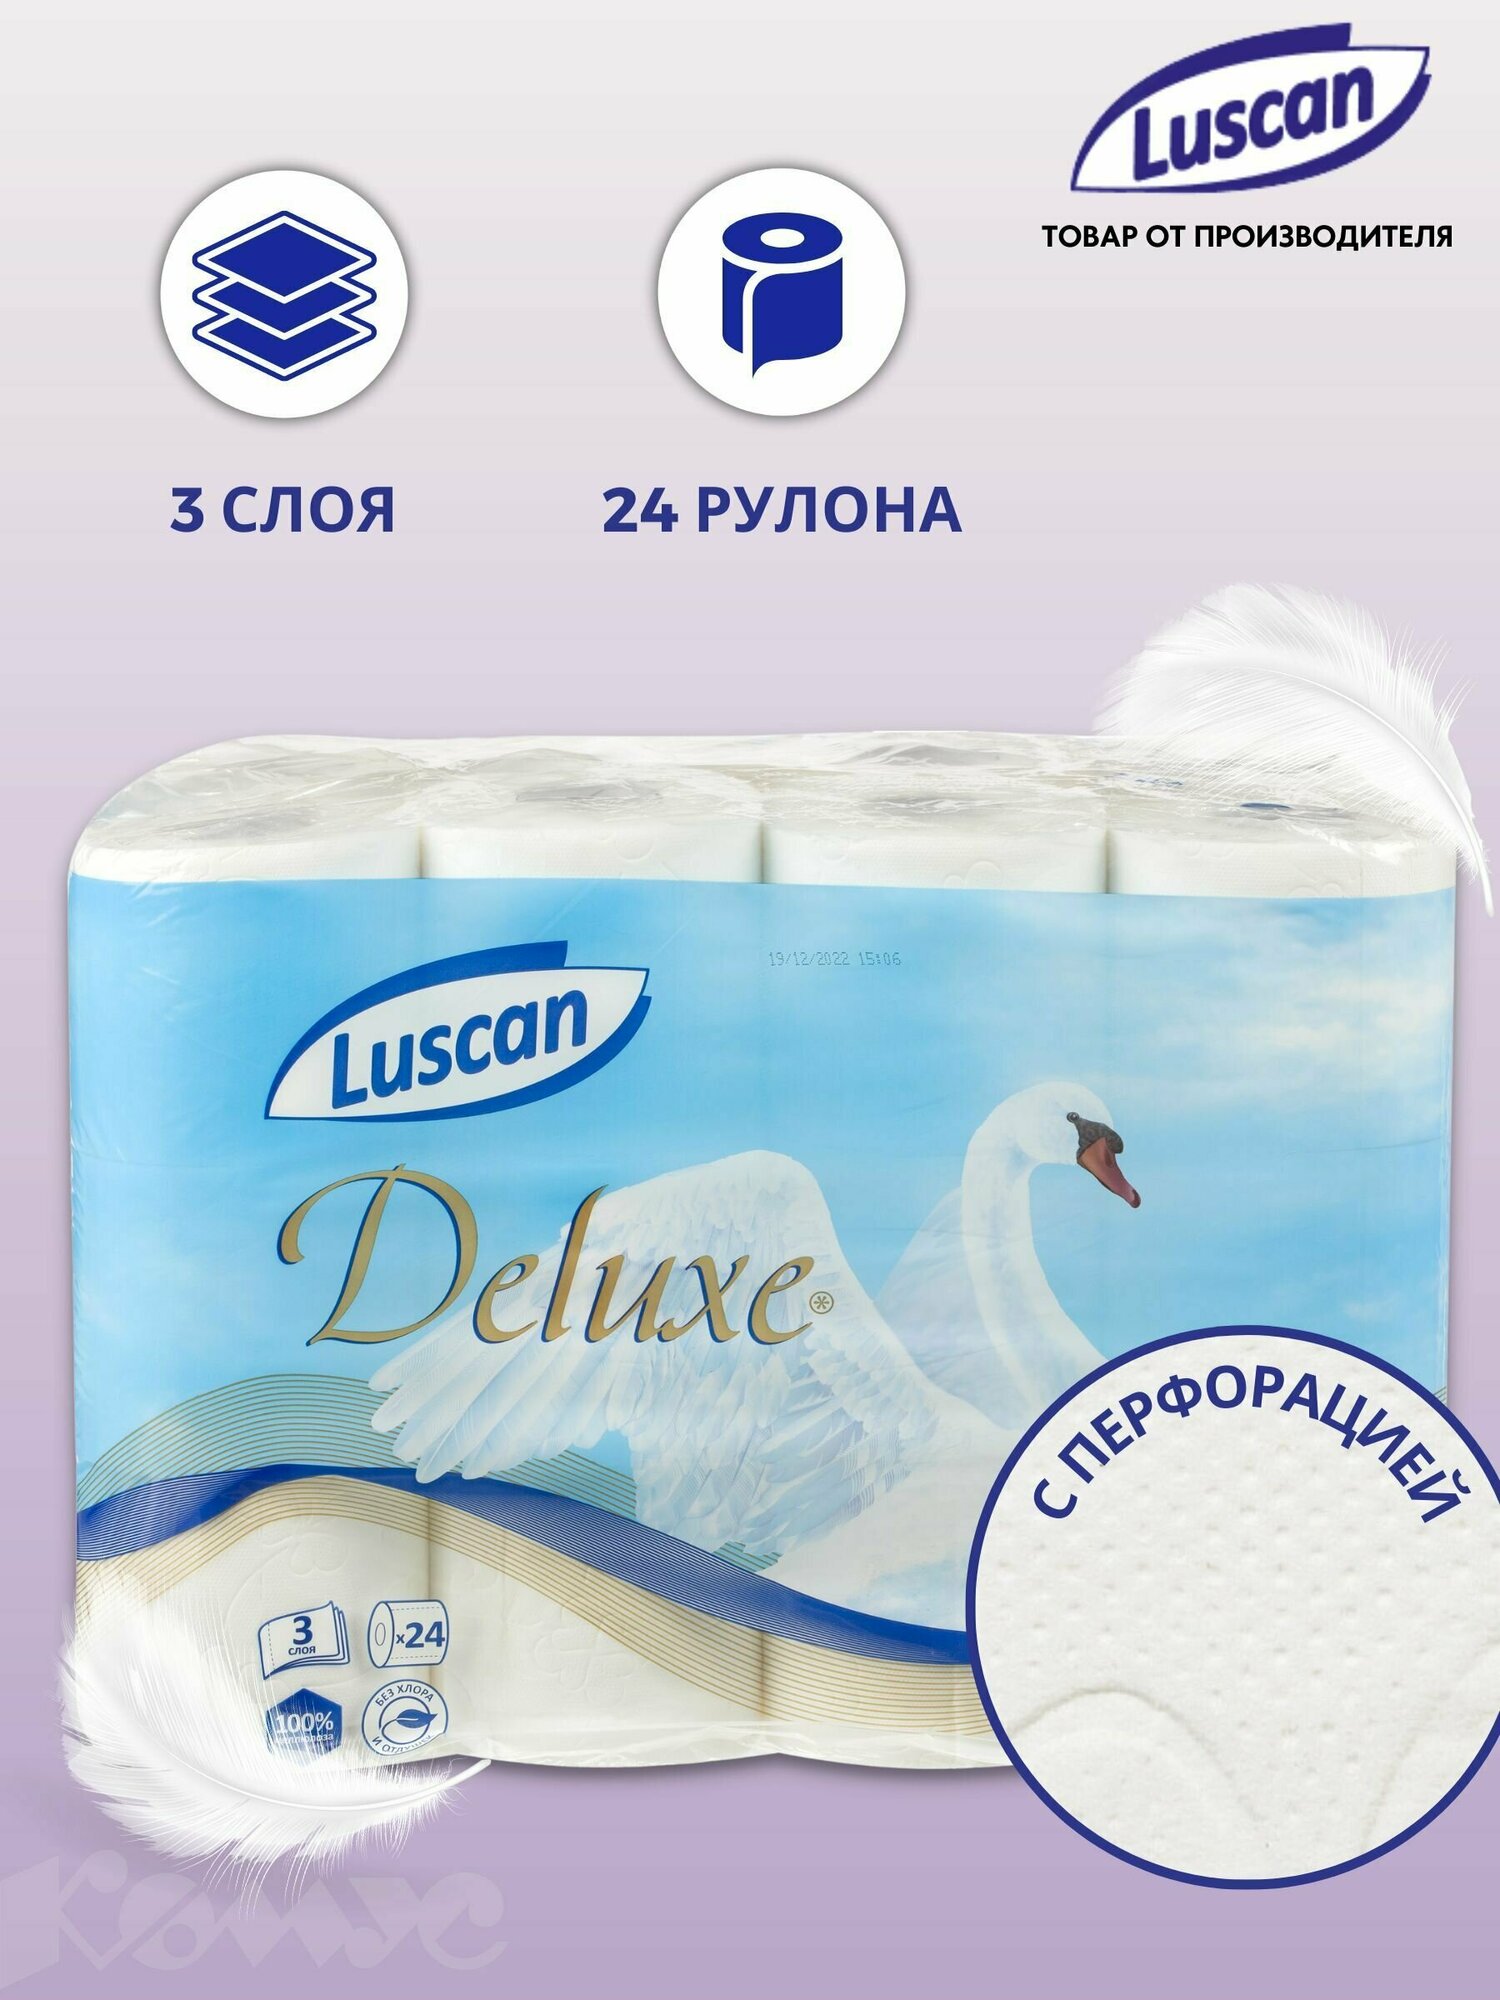   Luscan Deluxe 3   19,38 155 24/